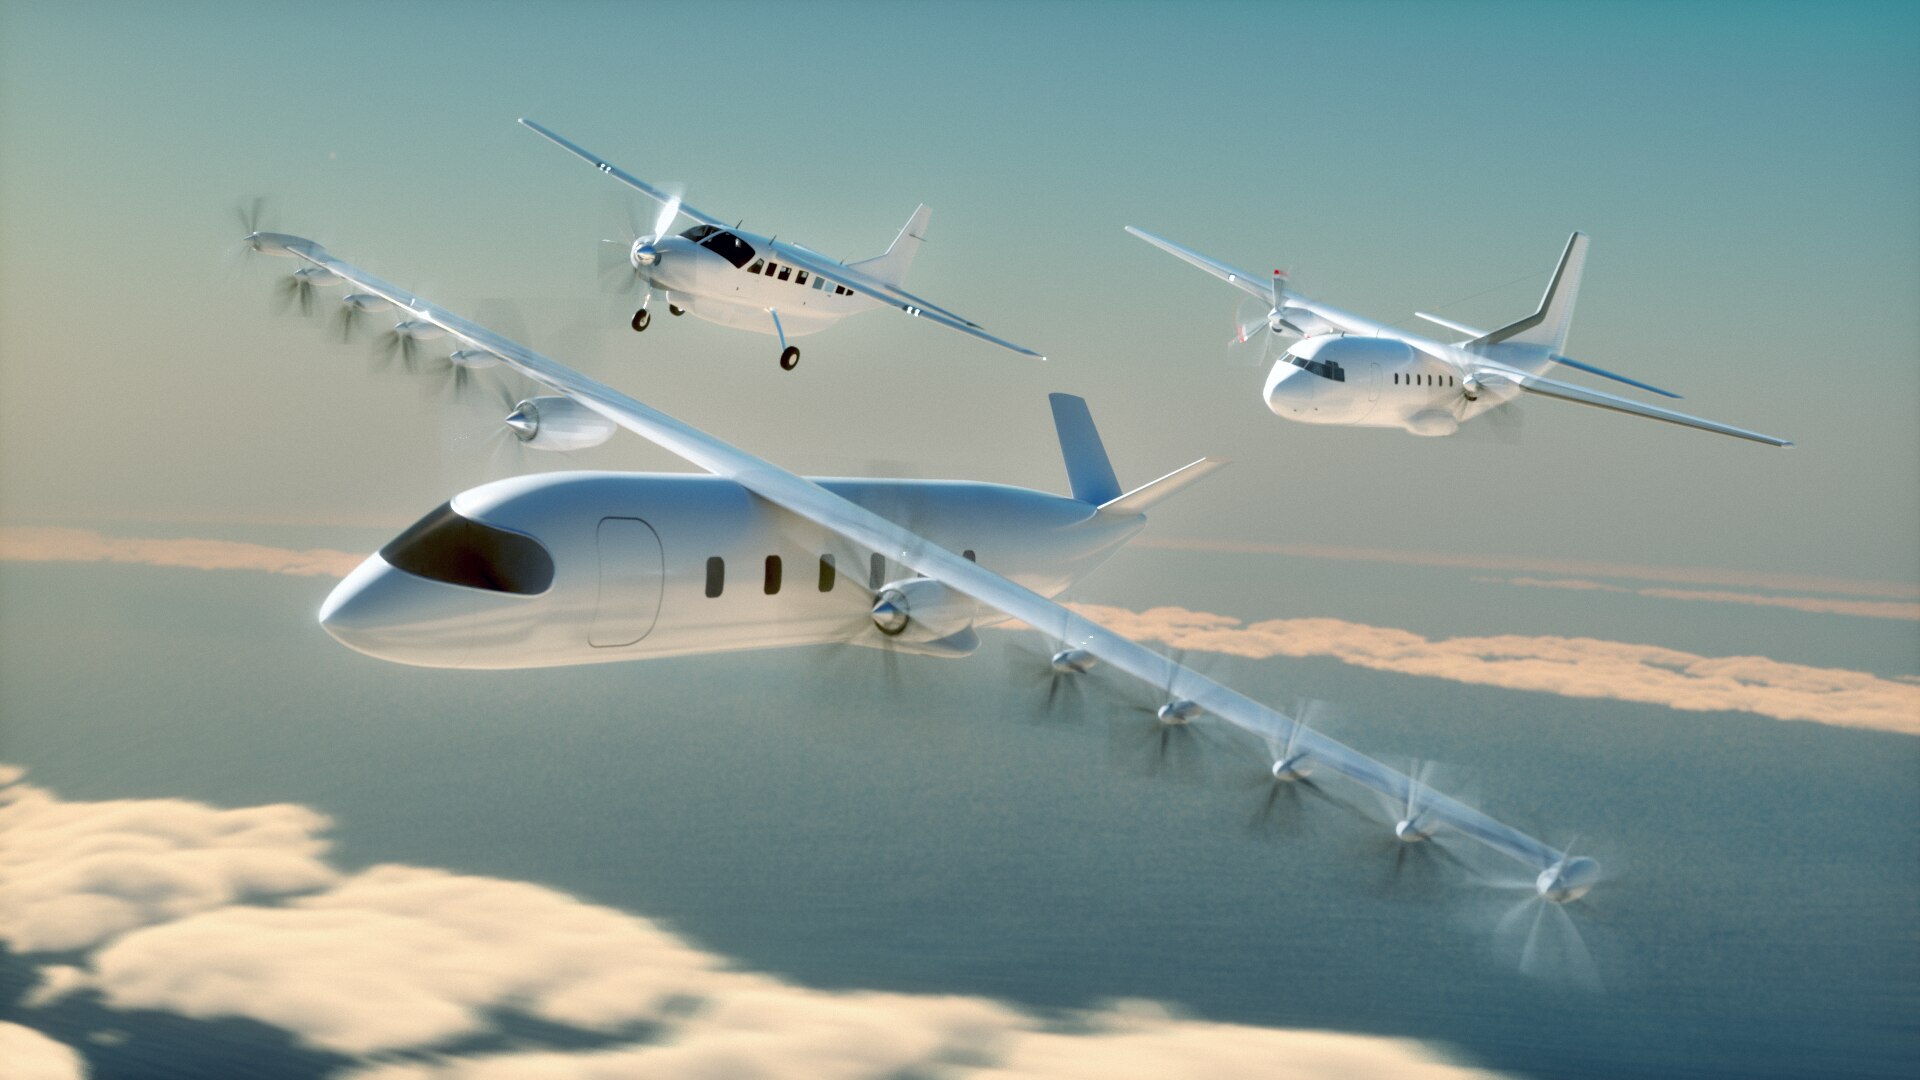 electric aeroplanes are already in our skies, so when will they become the norm?